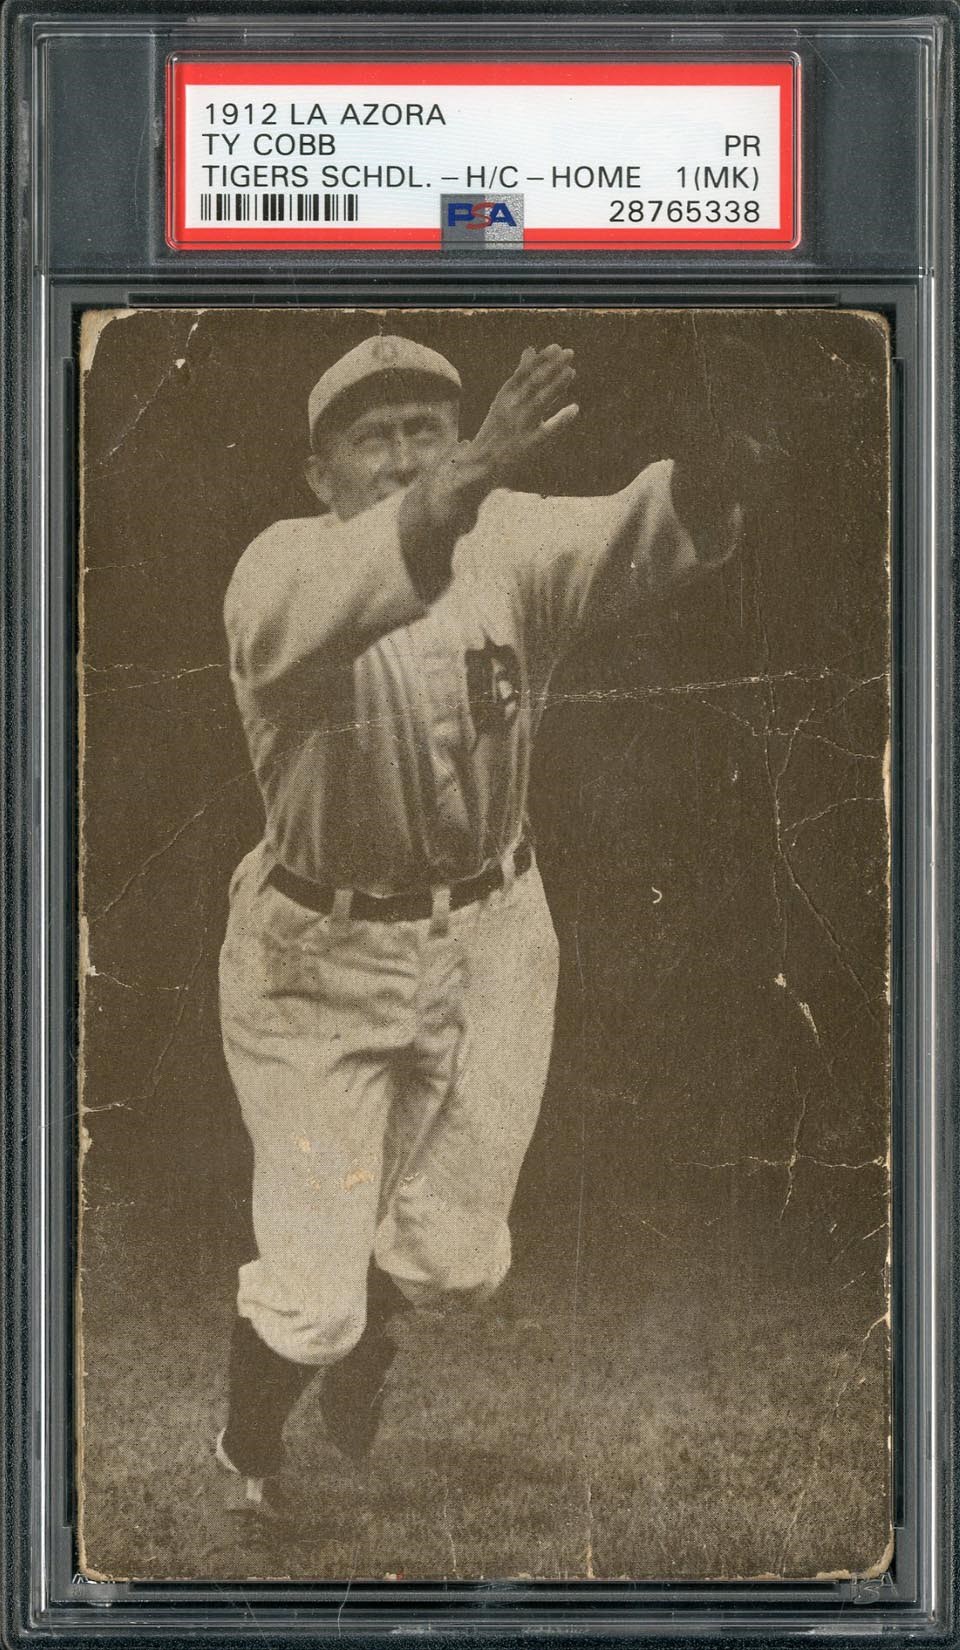 Baseball and Trading Cards - 1912 La Azora Ty Cobb Schedule Card - First PSA Graded Example!